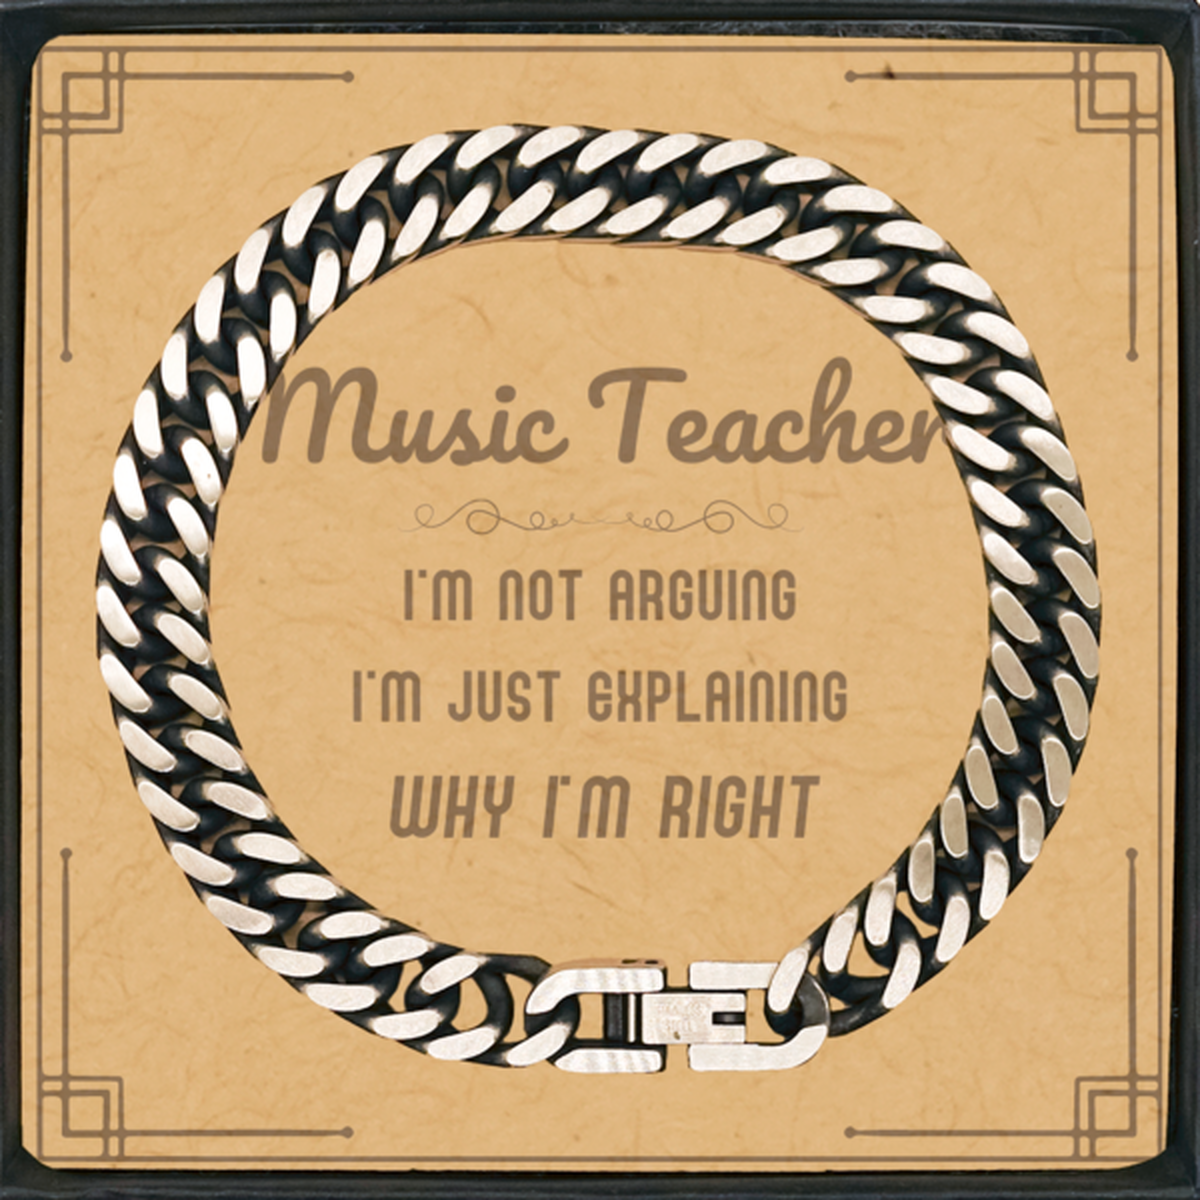 Music Teacher I'm not Arguing. I'm Just Explaining Why I'm RIGHT Cuban Link Chain Bracelet, Funny Saying Quote Music Teacher Gifts For Music Teacher Message Card Graduation Birthday Christmas Gifts for Men Women Coworker